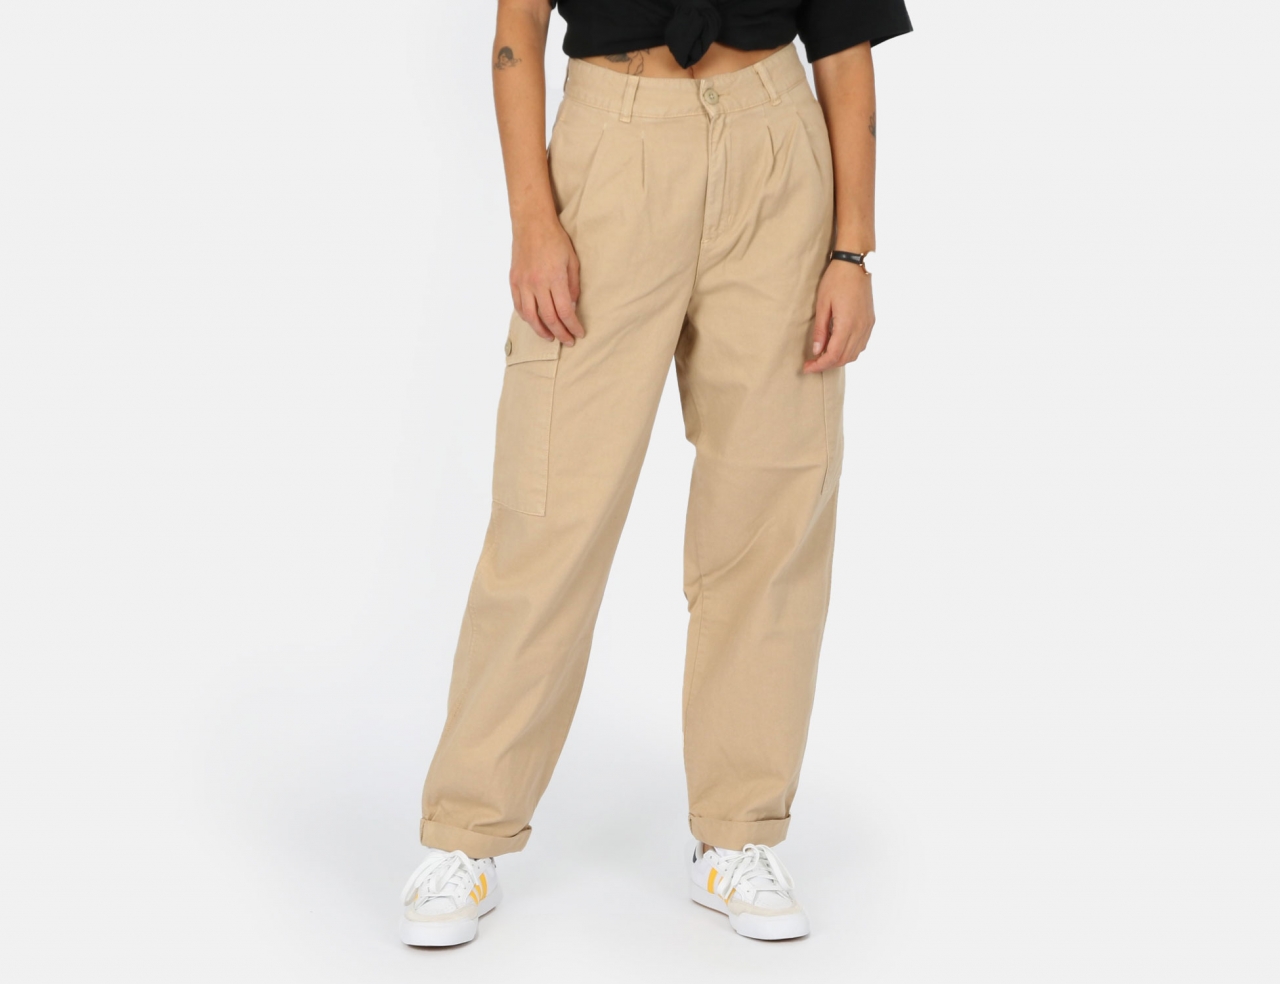 Carhartt WIP W&#039; Collins Pant - Sable garment dyed